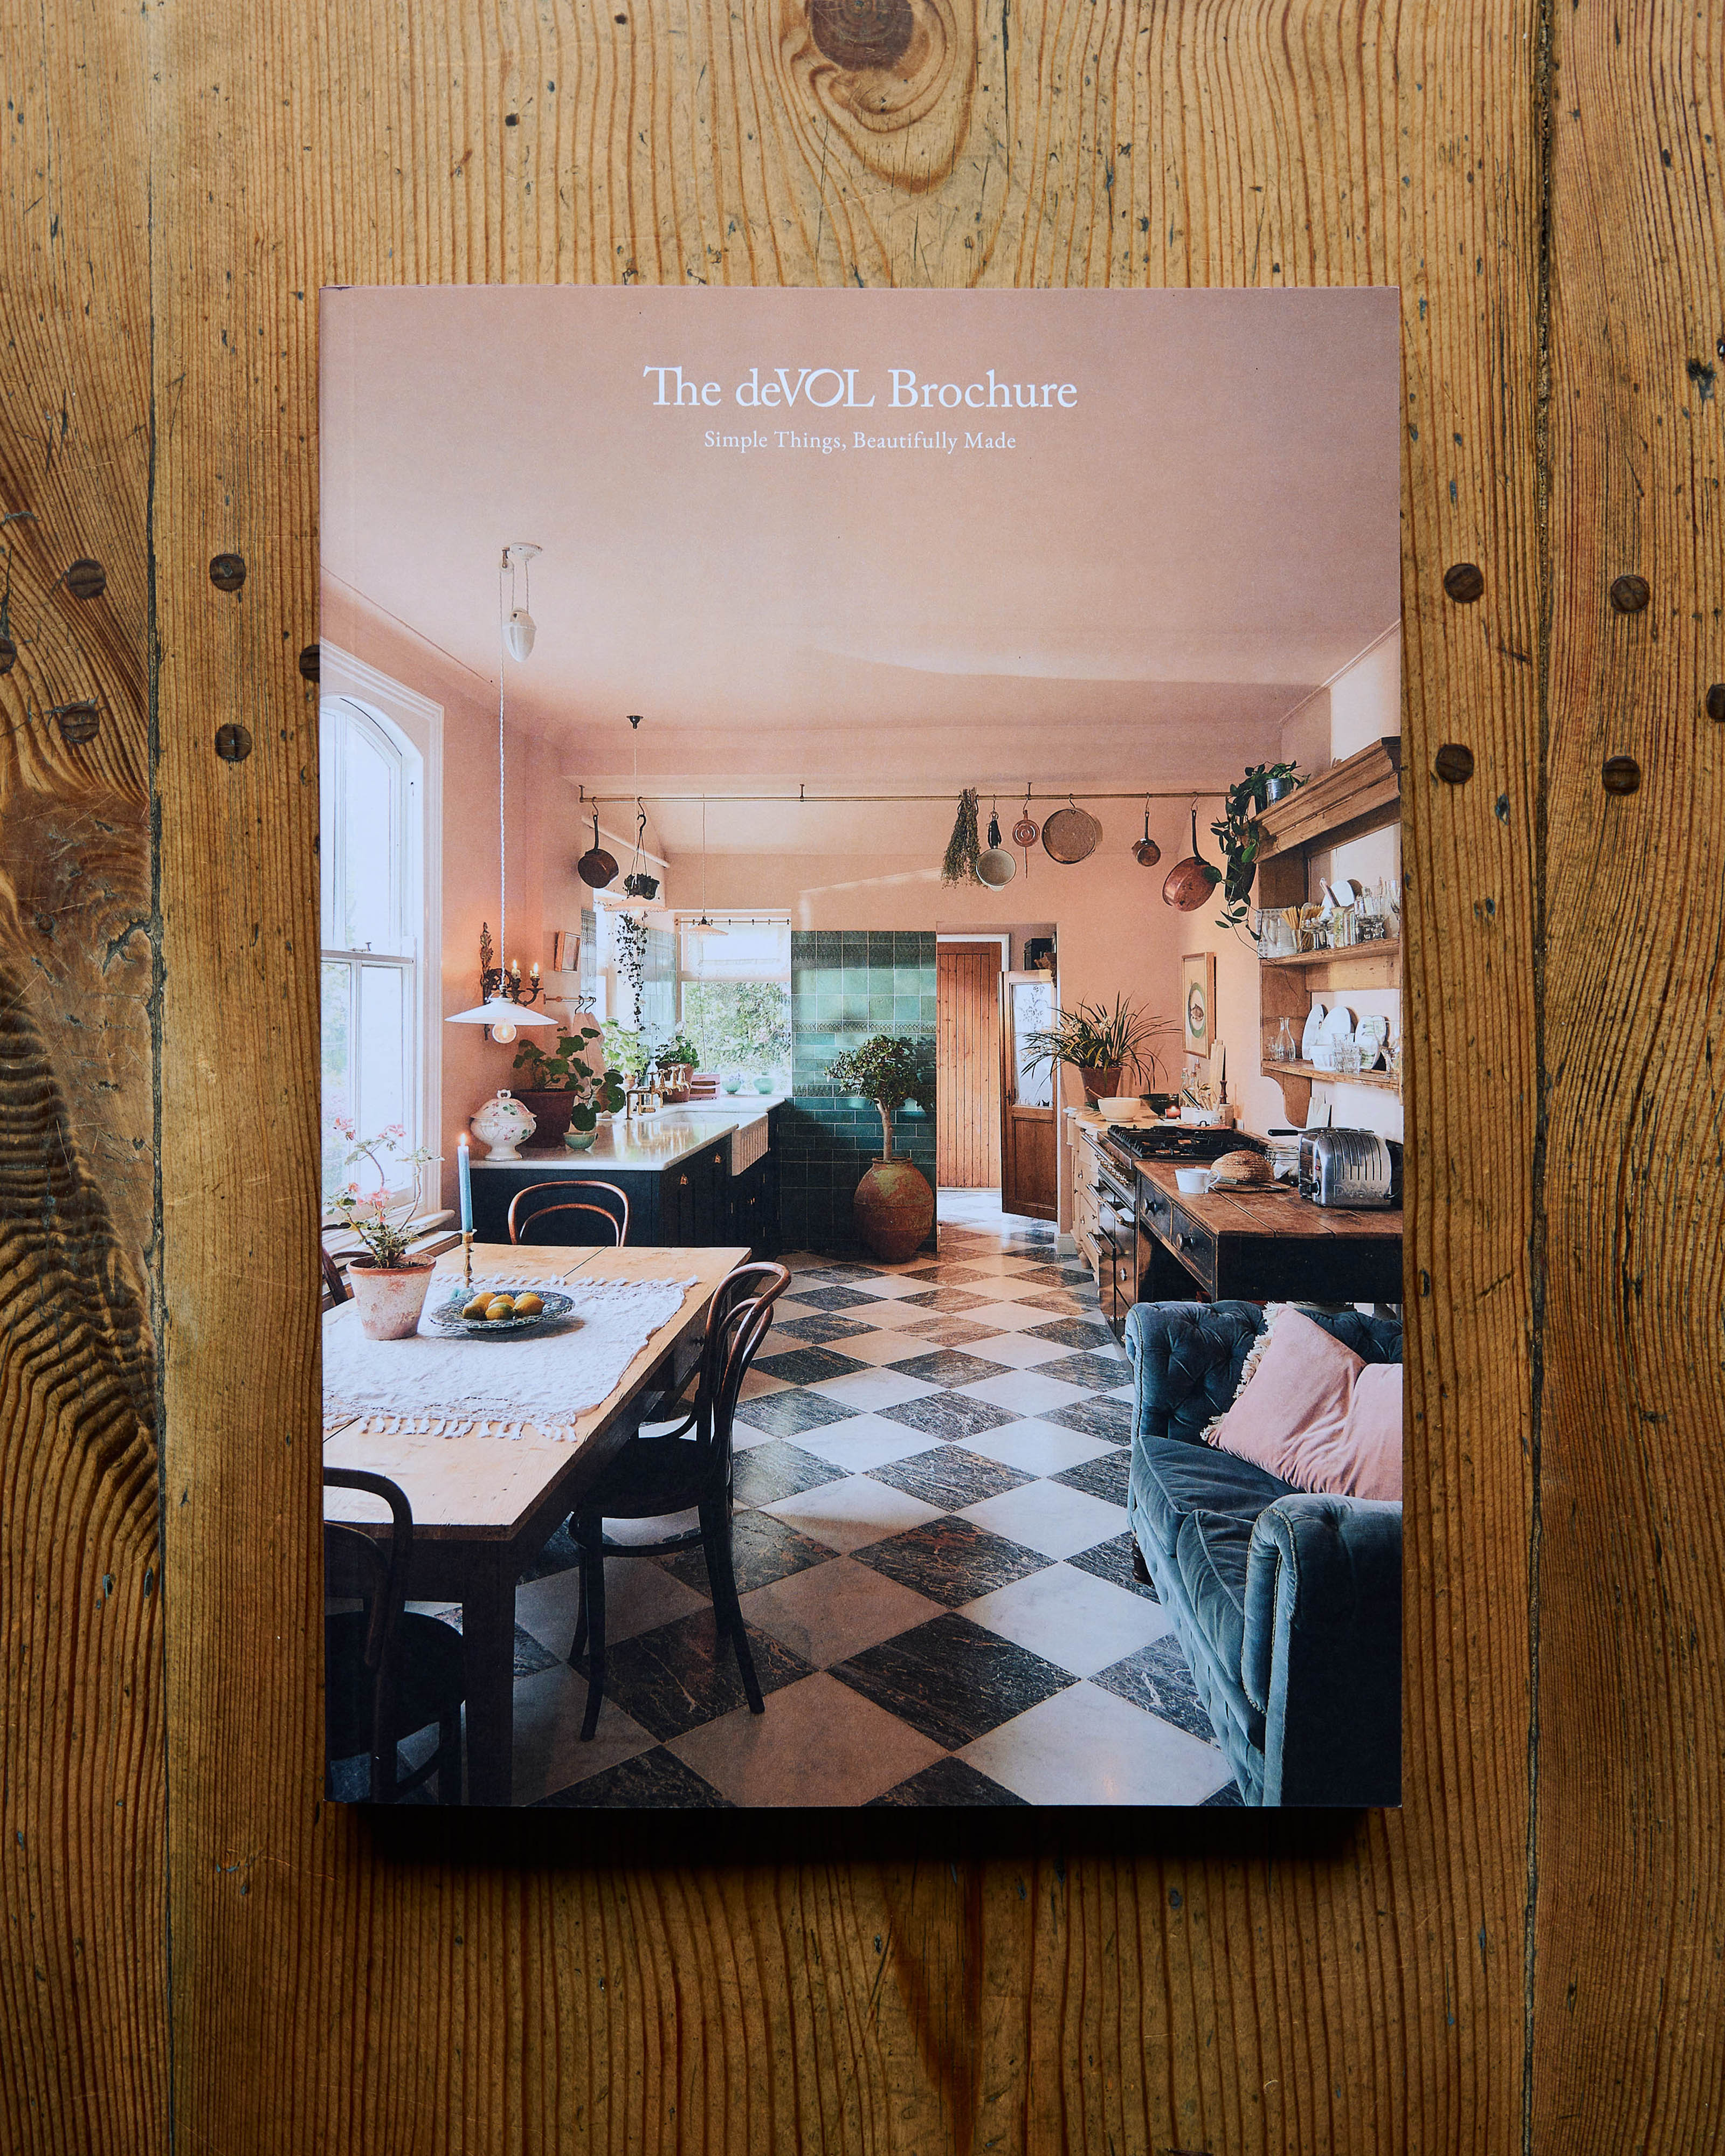 The deVOL Kitchen (Hardback book, signed by the authors)